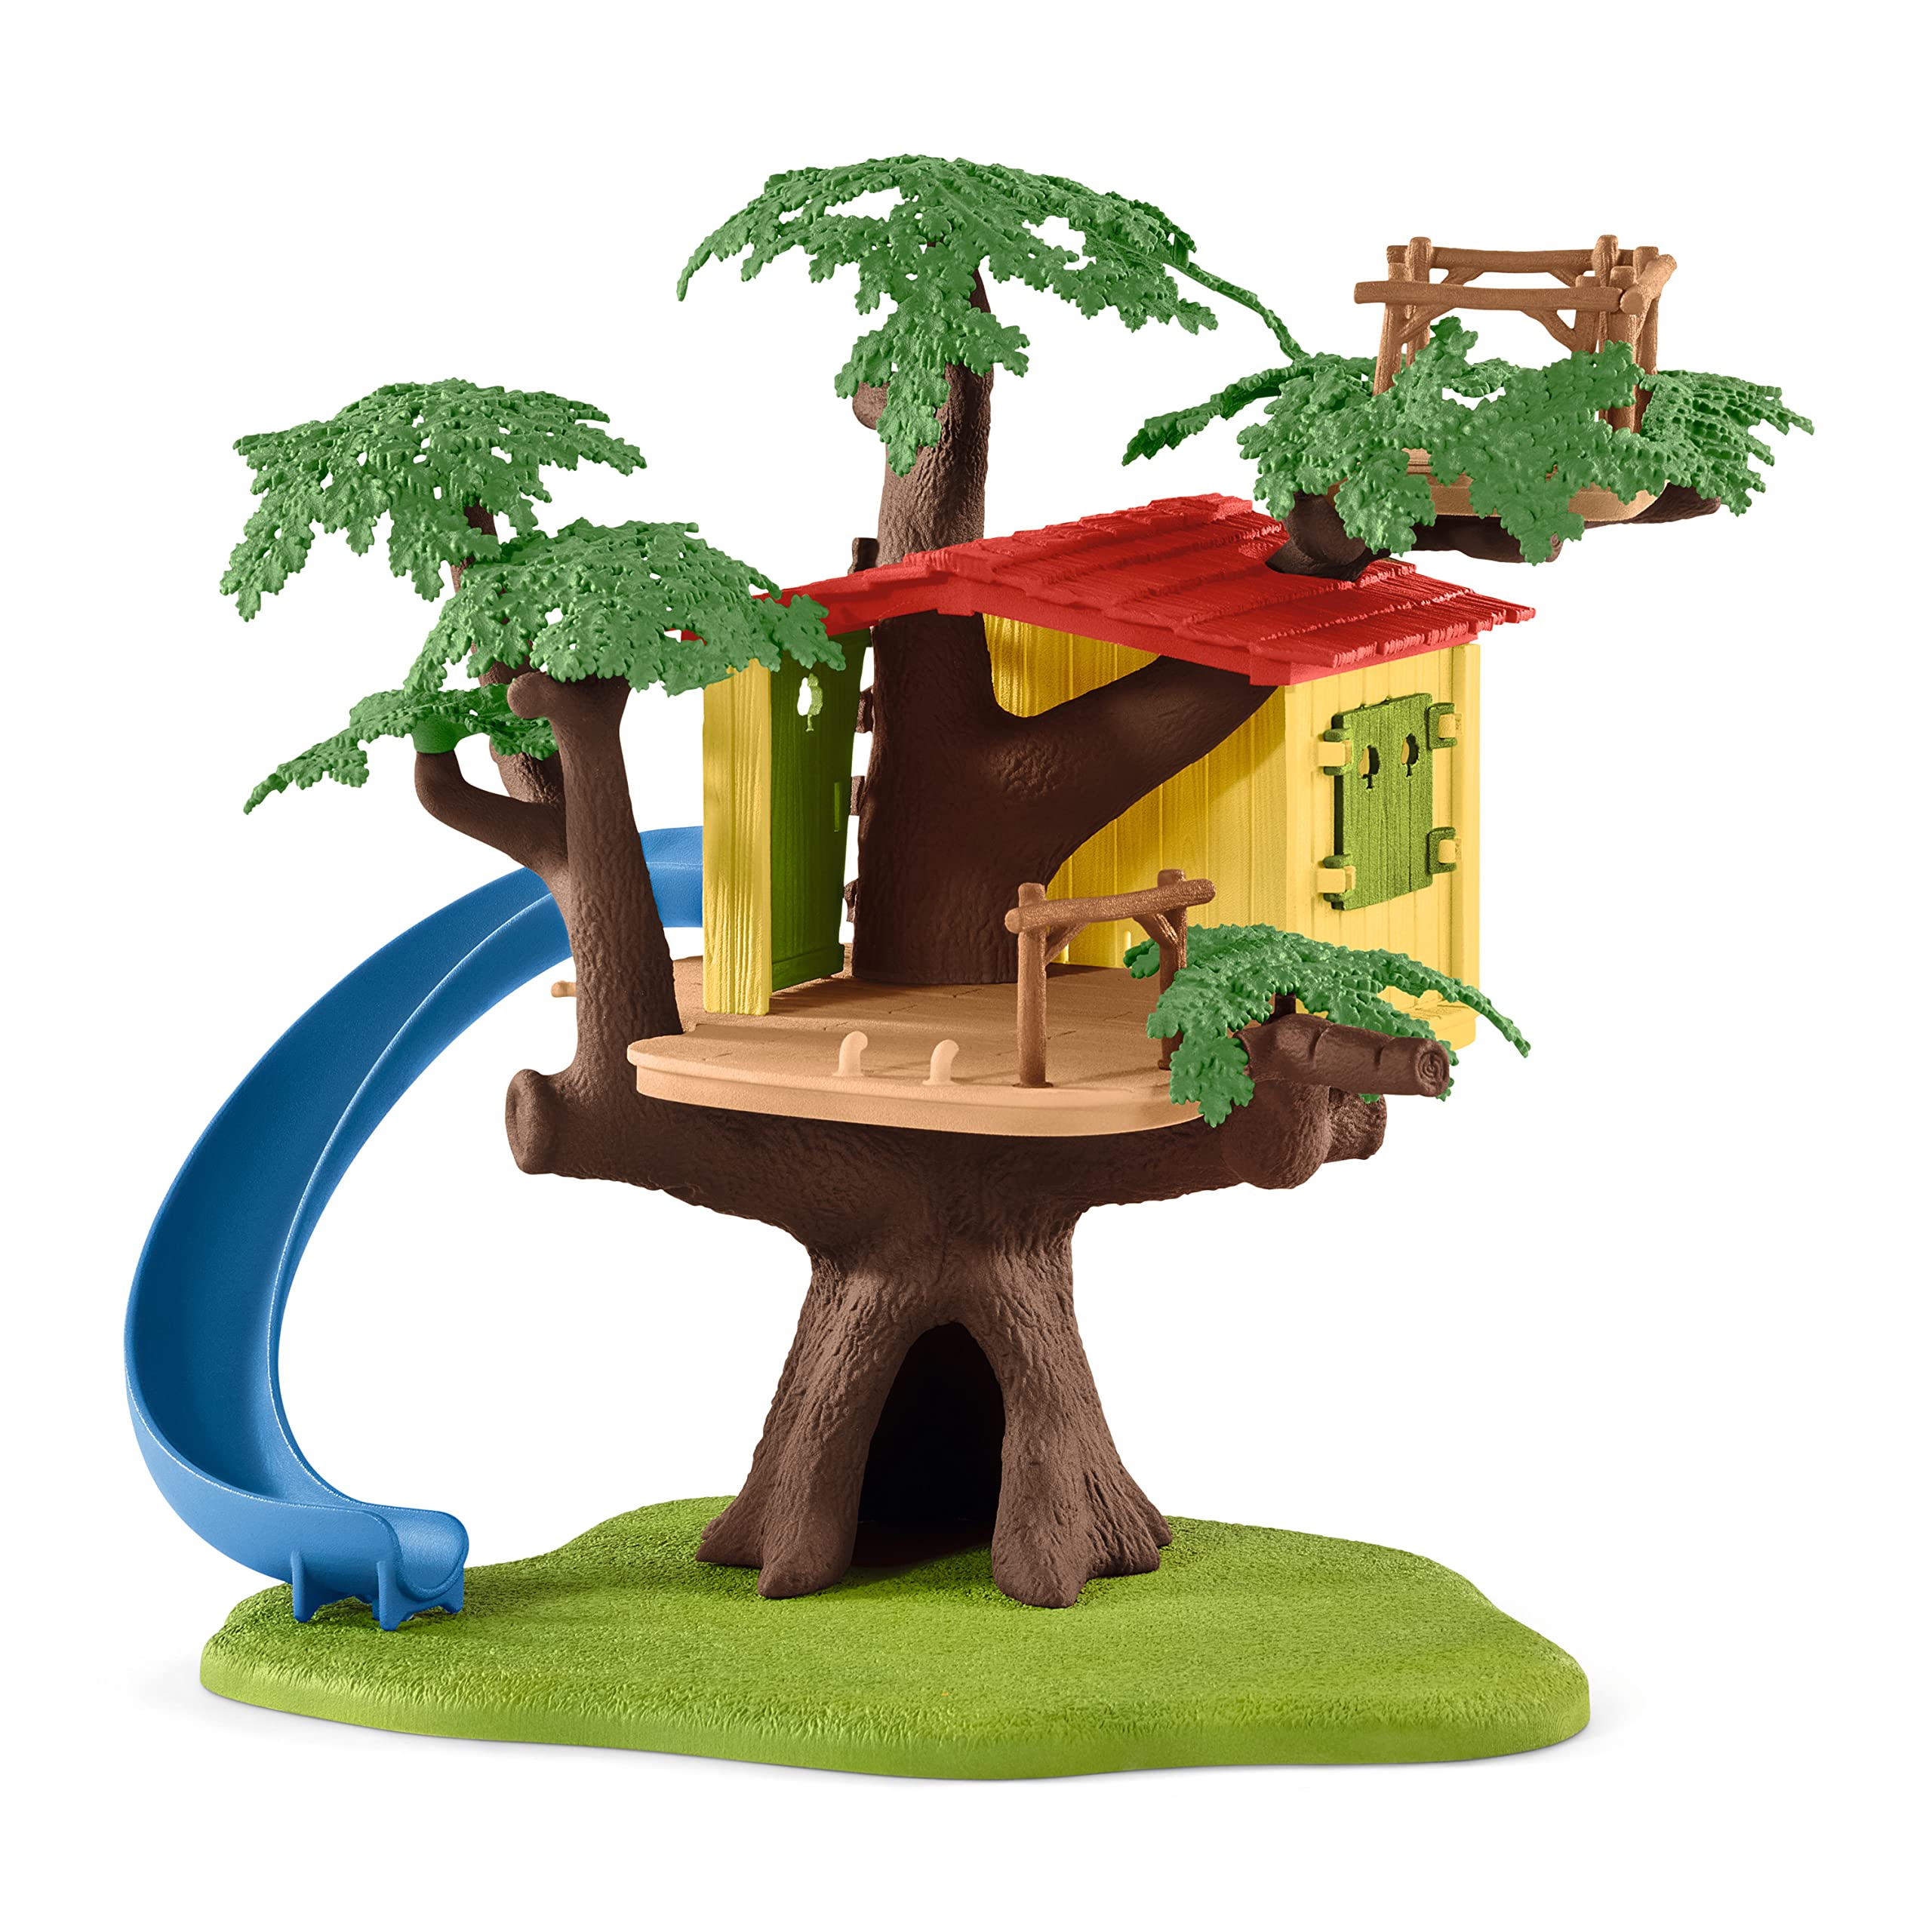 Schleich Farm World, Farm Animal Gifts for Kids, Adventure Tree House with Animal Figurines and Accessories 28-Piece Set, Ages 3+